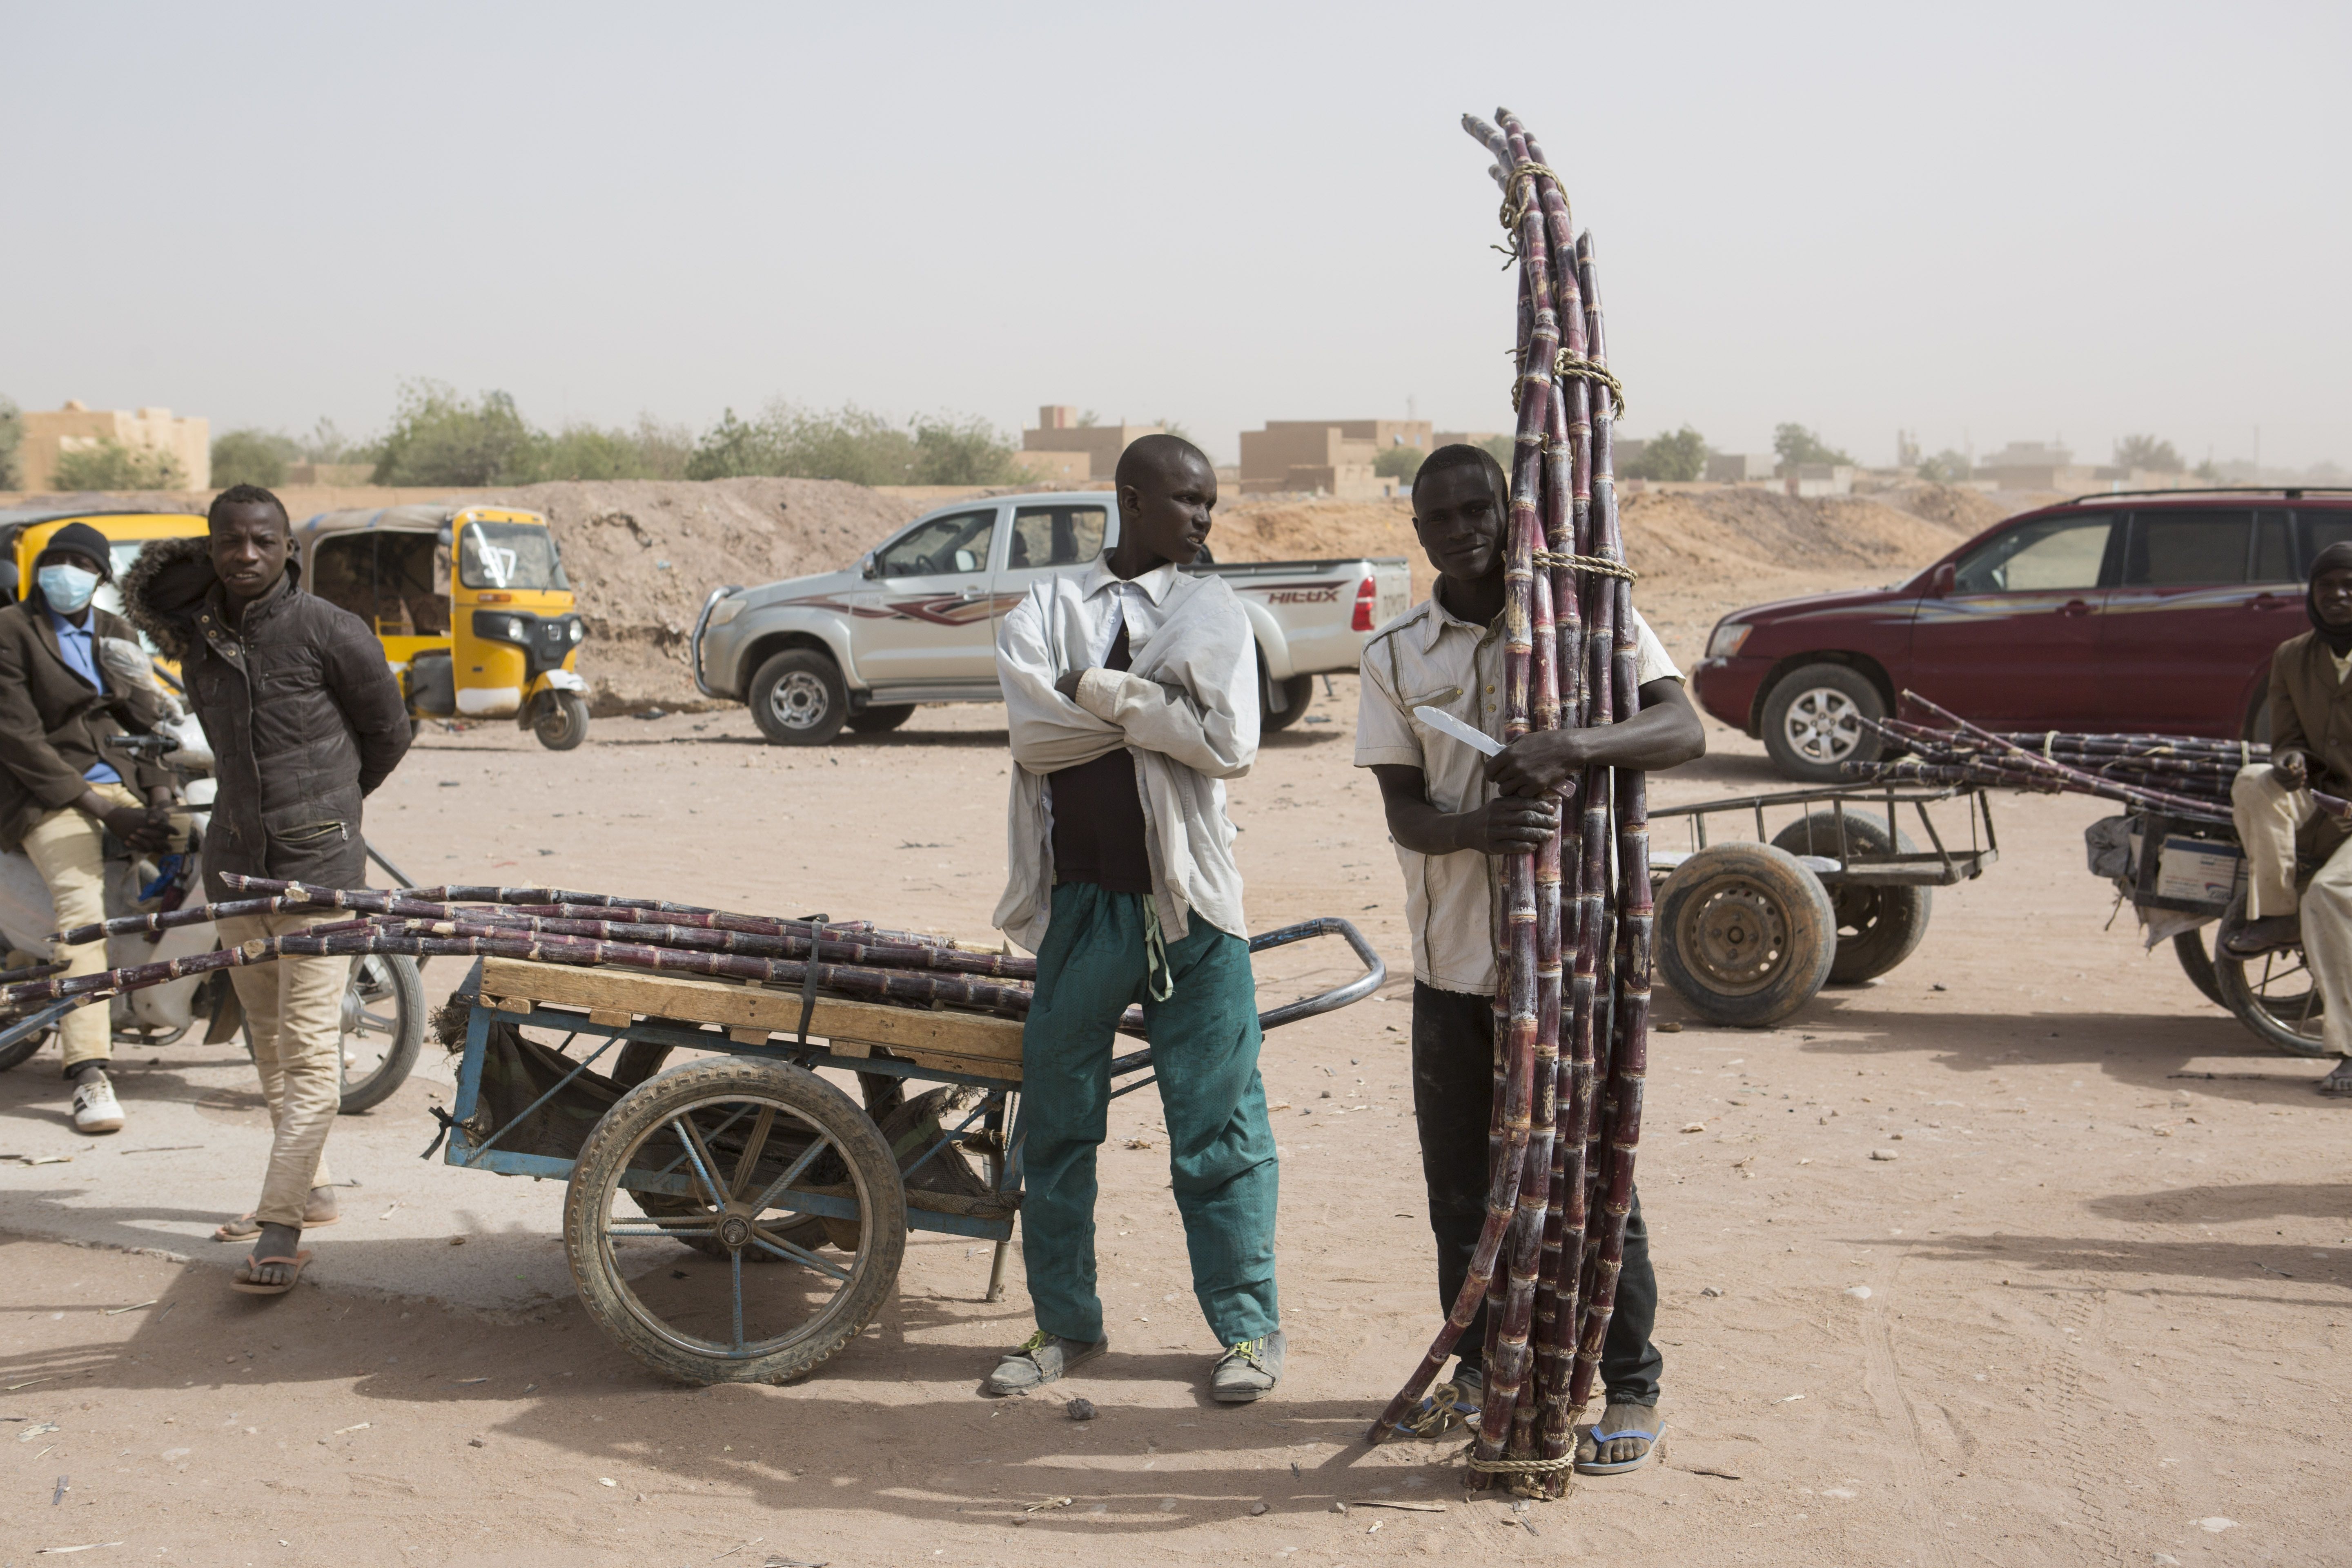 Sugarcane vendors stand outside during a ceremony at a police station in Agadez, Niger, Jan. 15, 2018. Image by Joe Penney. Niger, 2018.